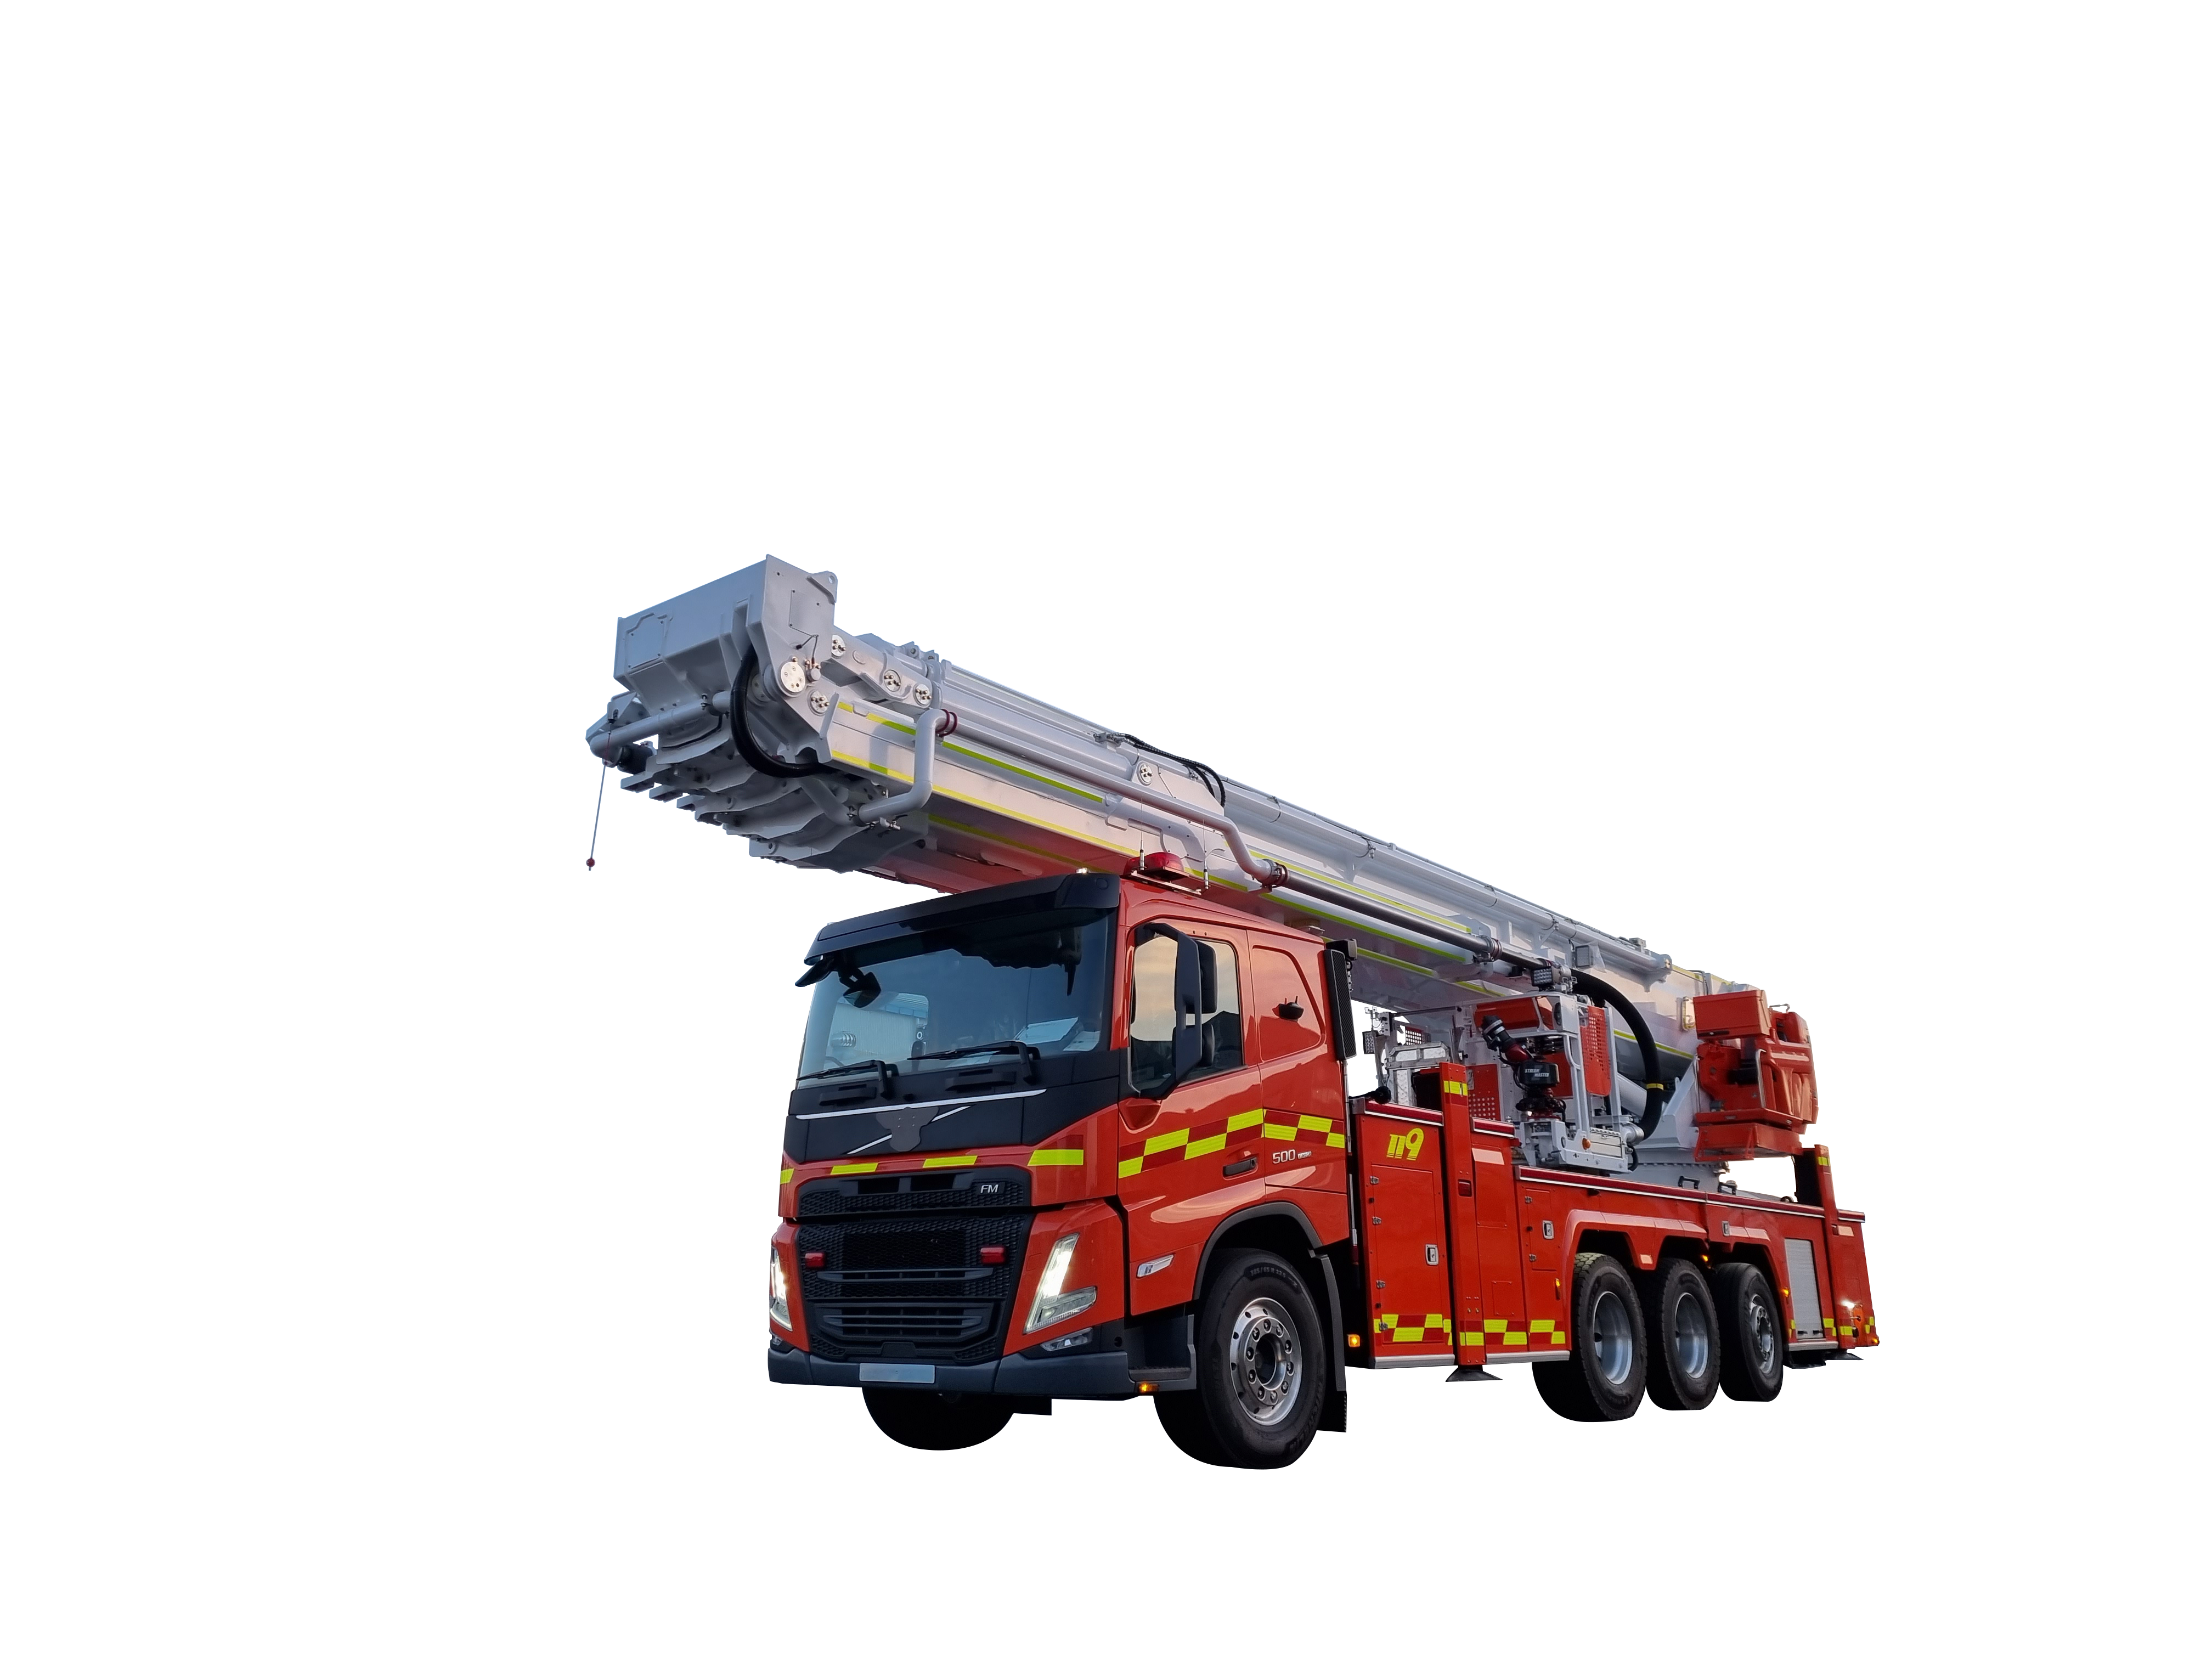 firefighting rescue vehicle